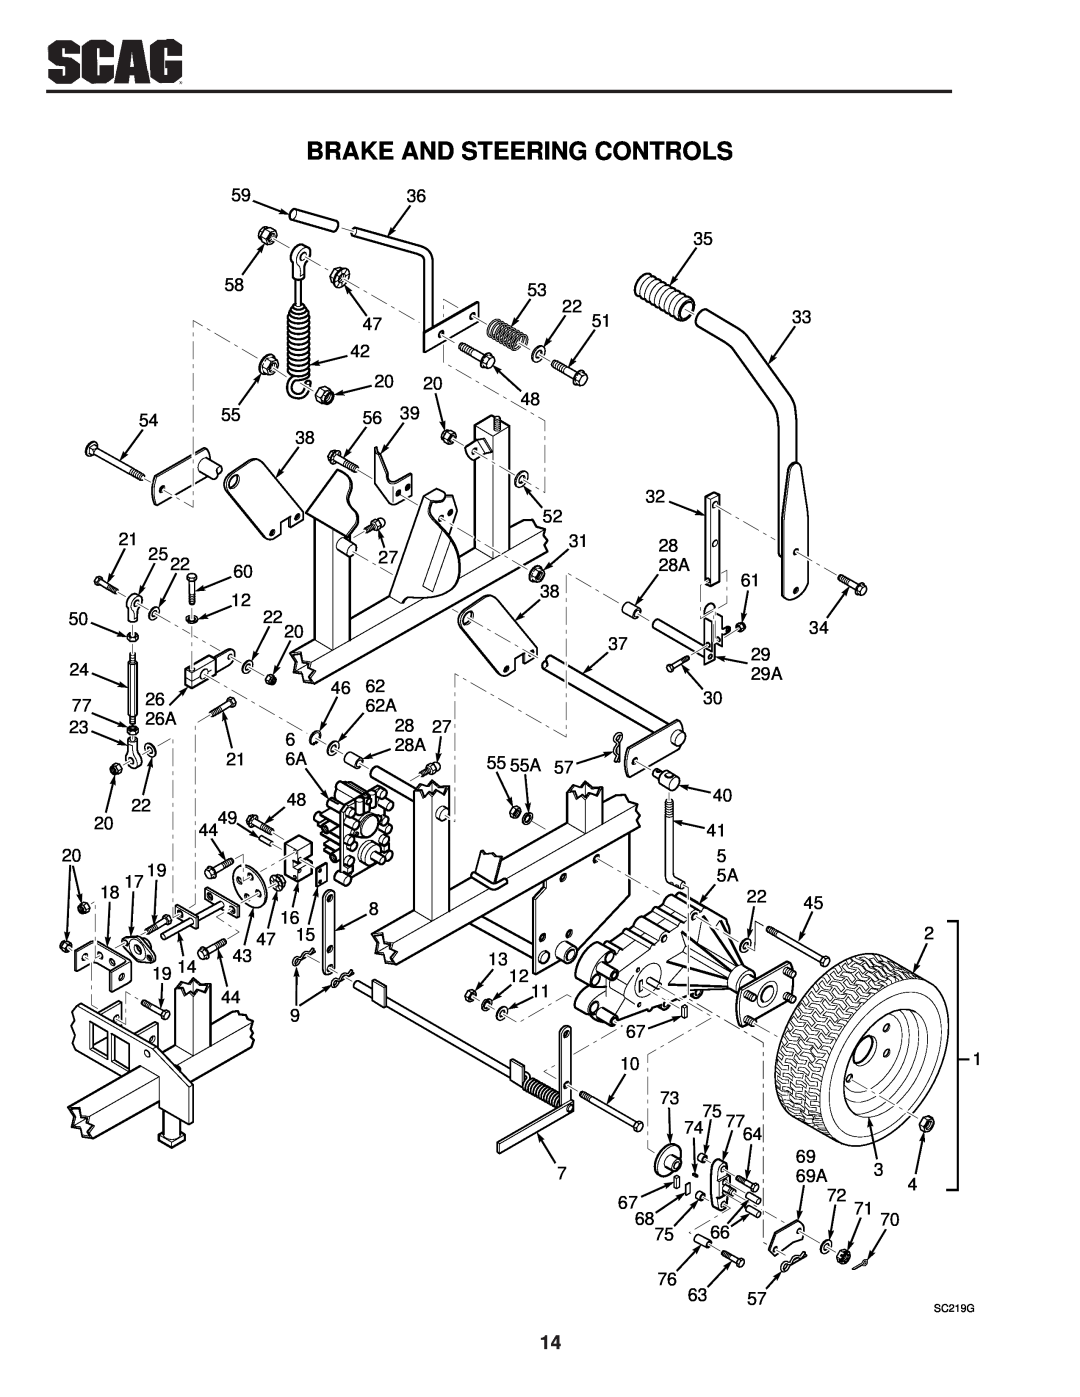 Scag Power Equipment SSZ operating instructions Brake And Steering Controls, SC219G 